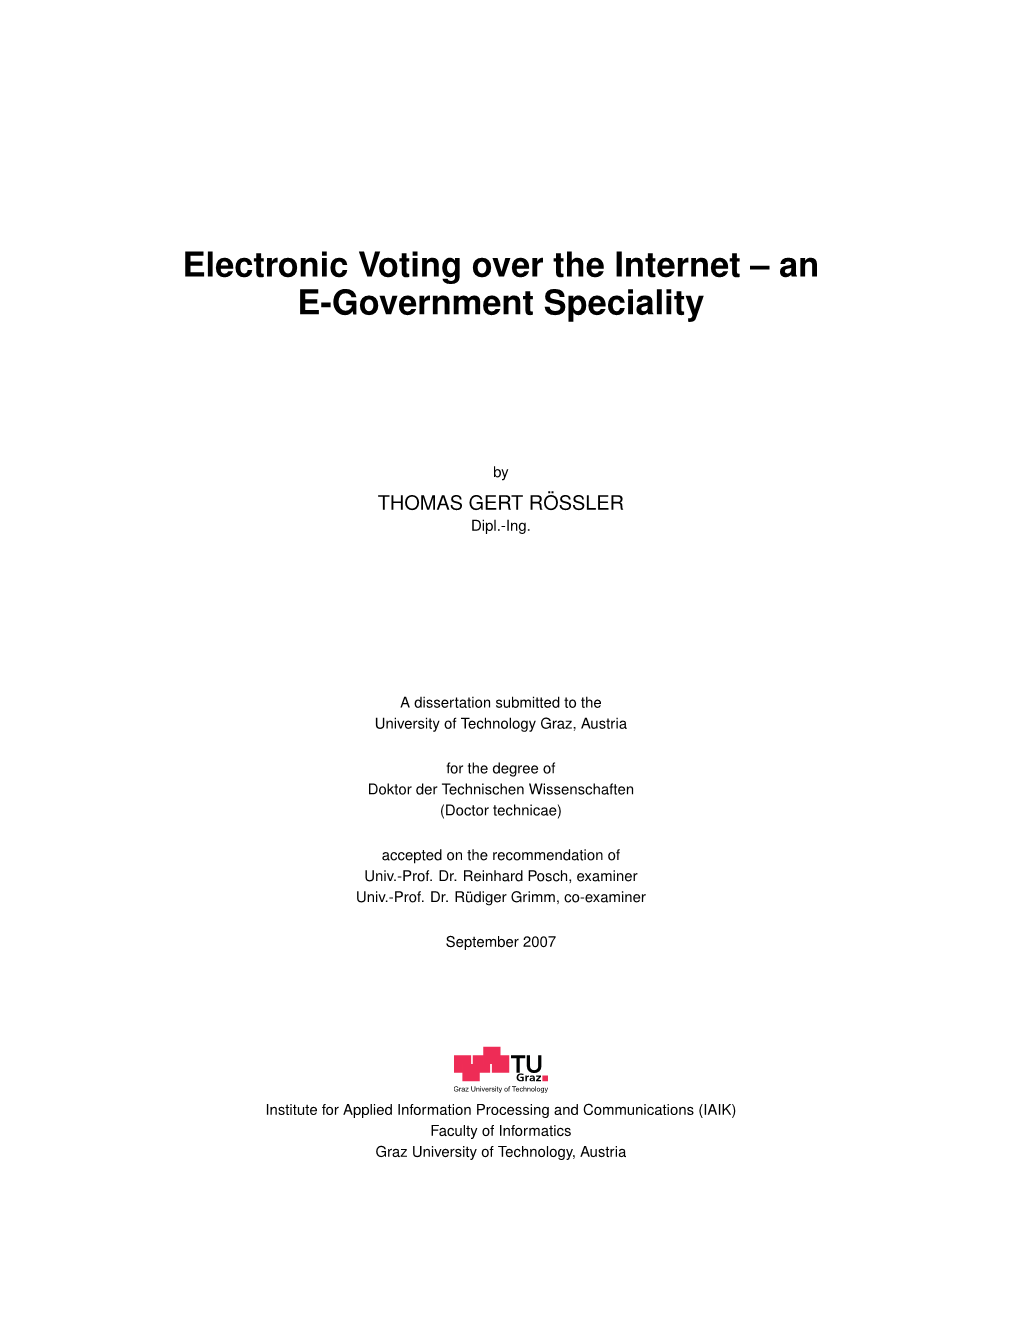 Electronic Voting Over the Internet – an E-Government Speciality